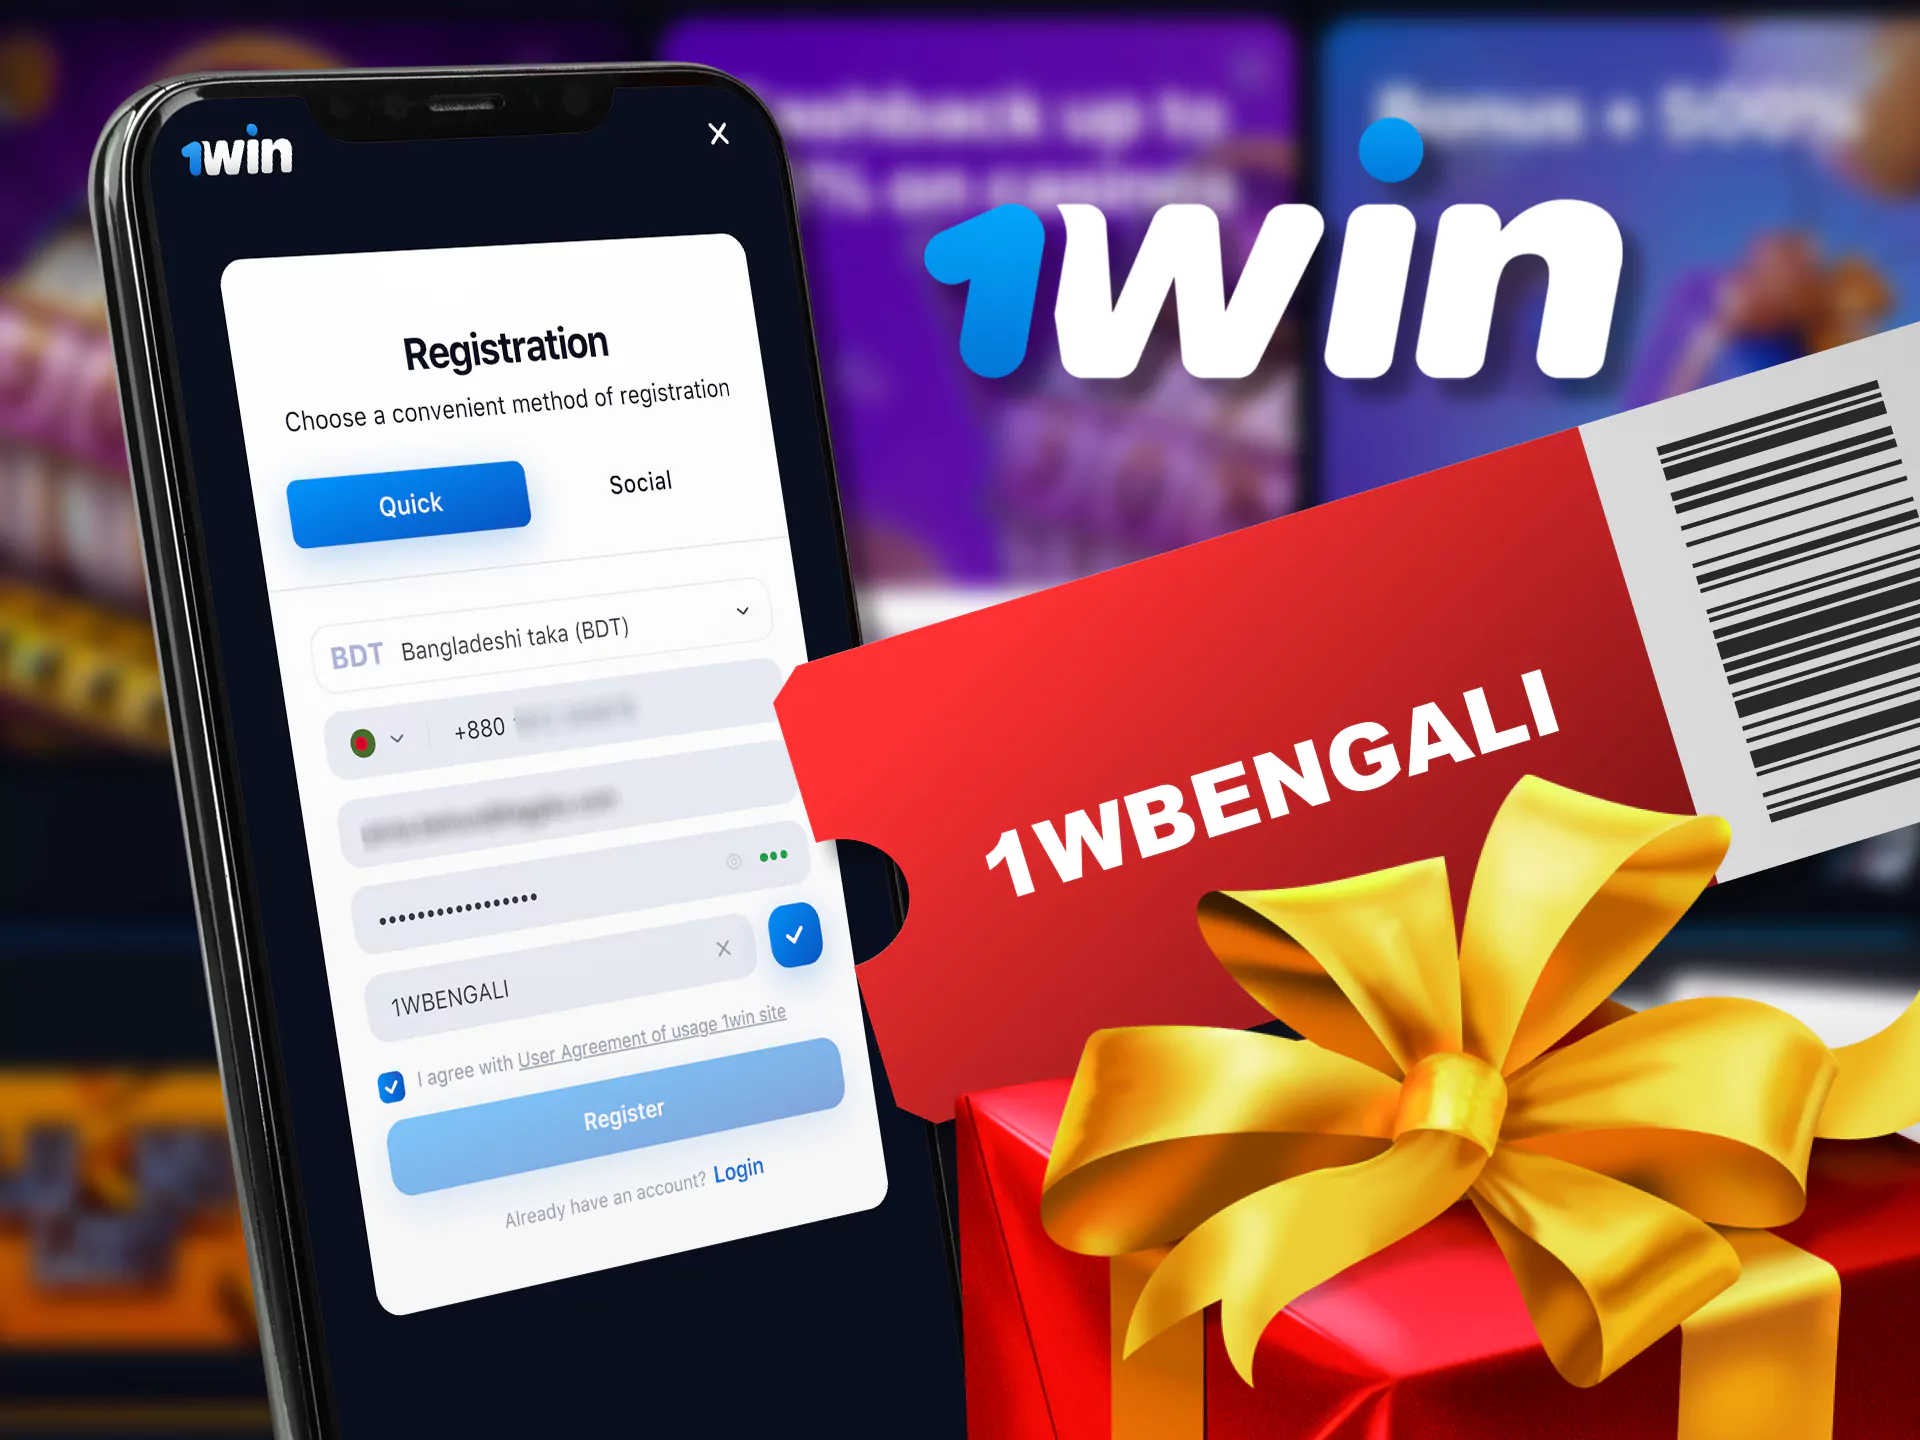 When registering in the 1Win app, apply a special promo code.